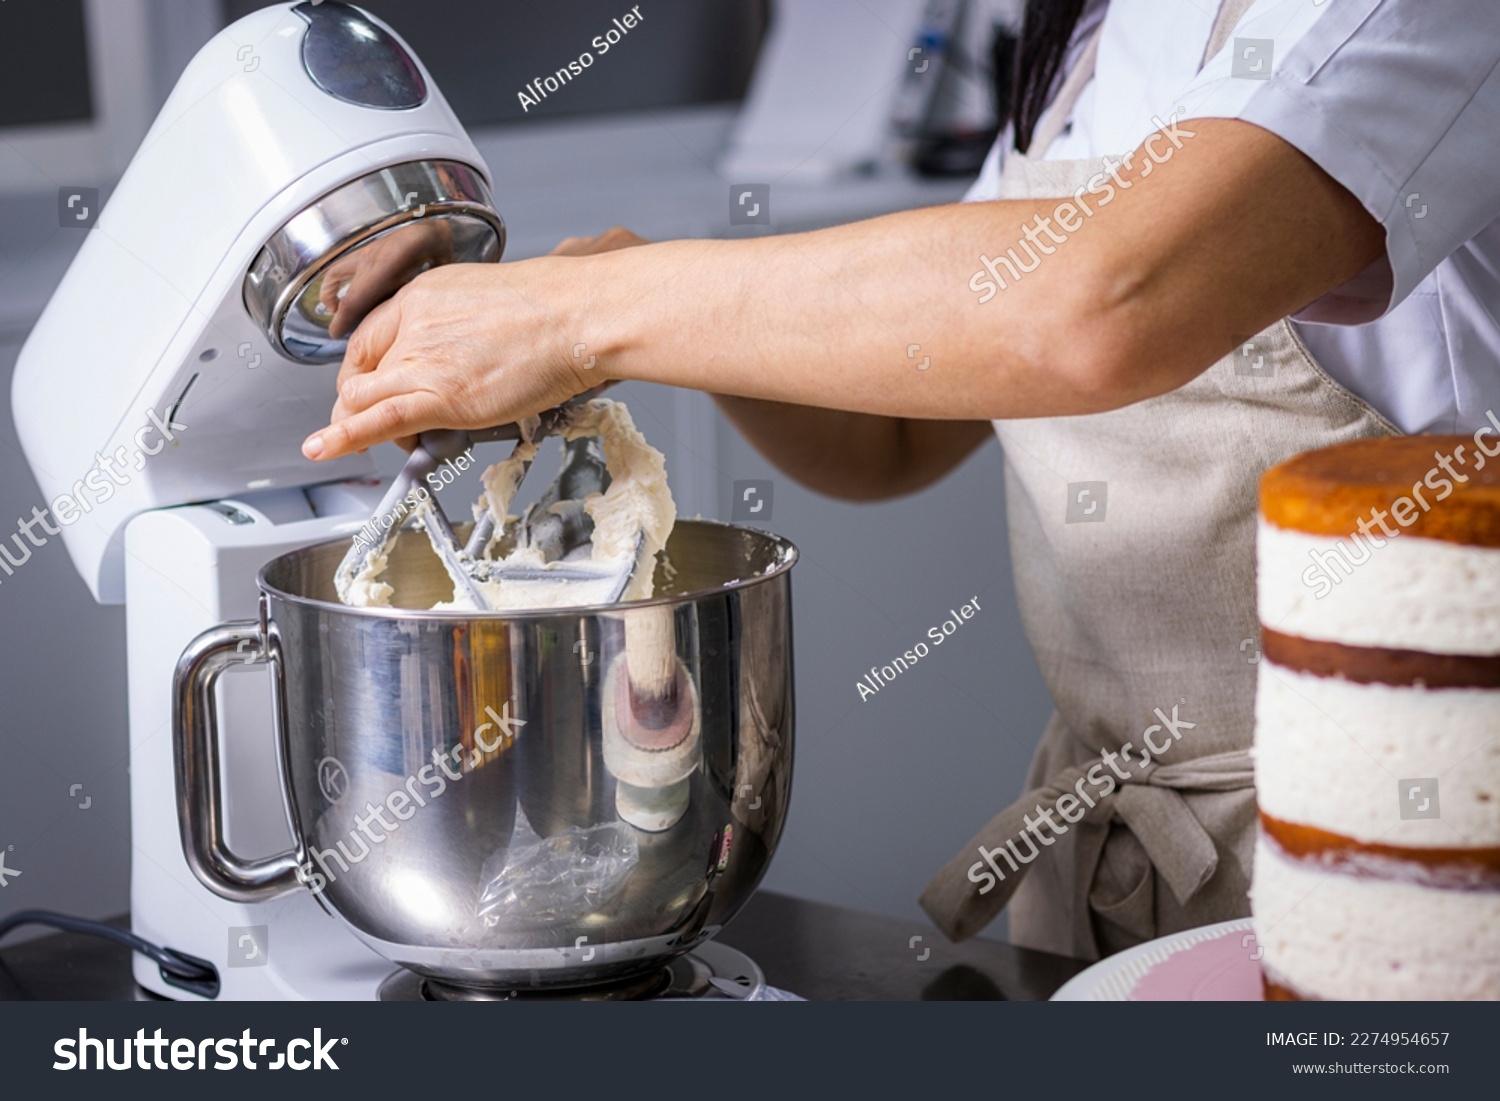 Close-up of a professional chef's hands working the batter with a food processor. #2274954657